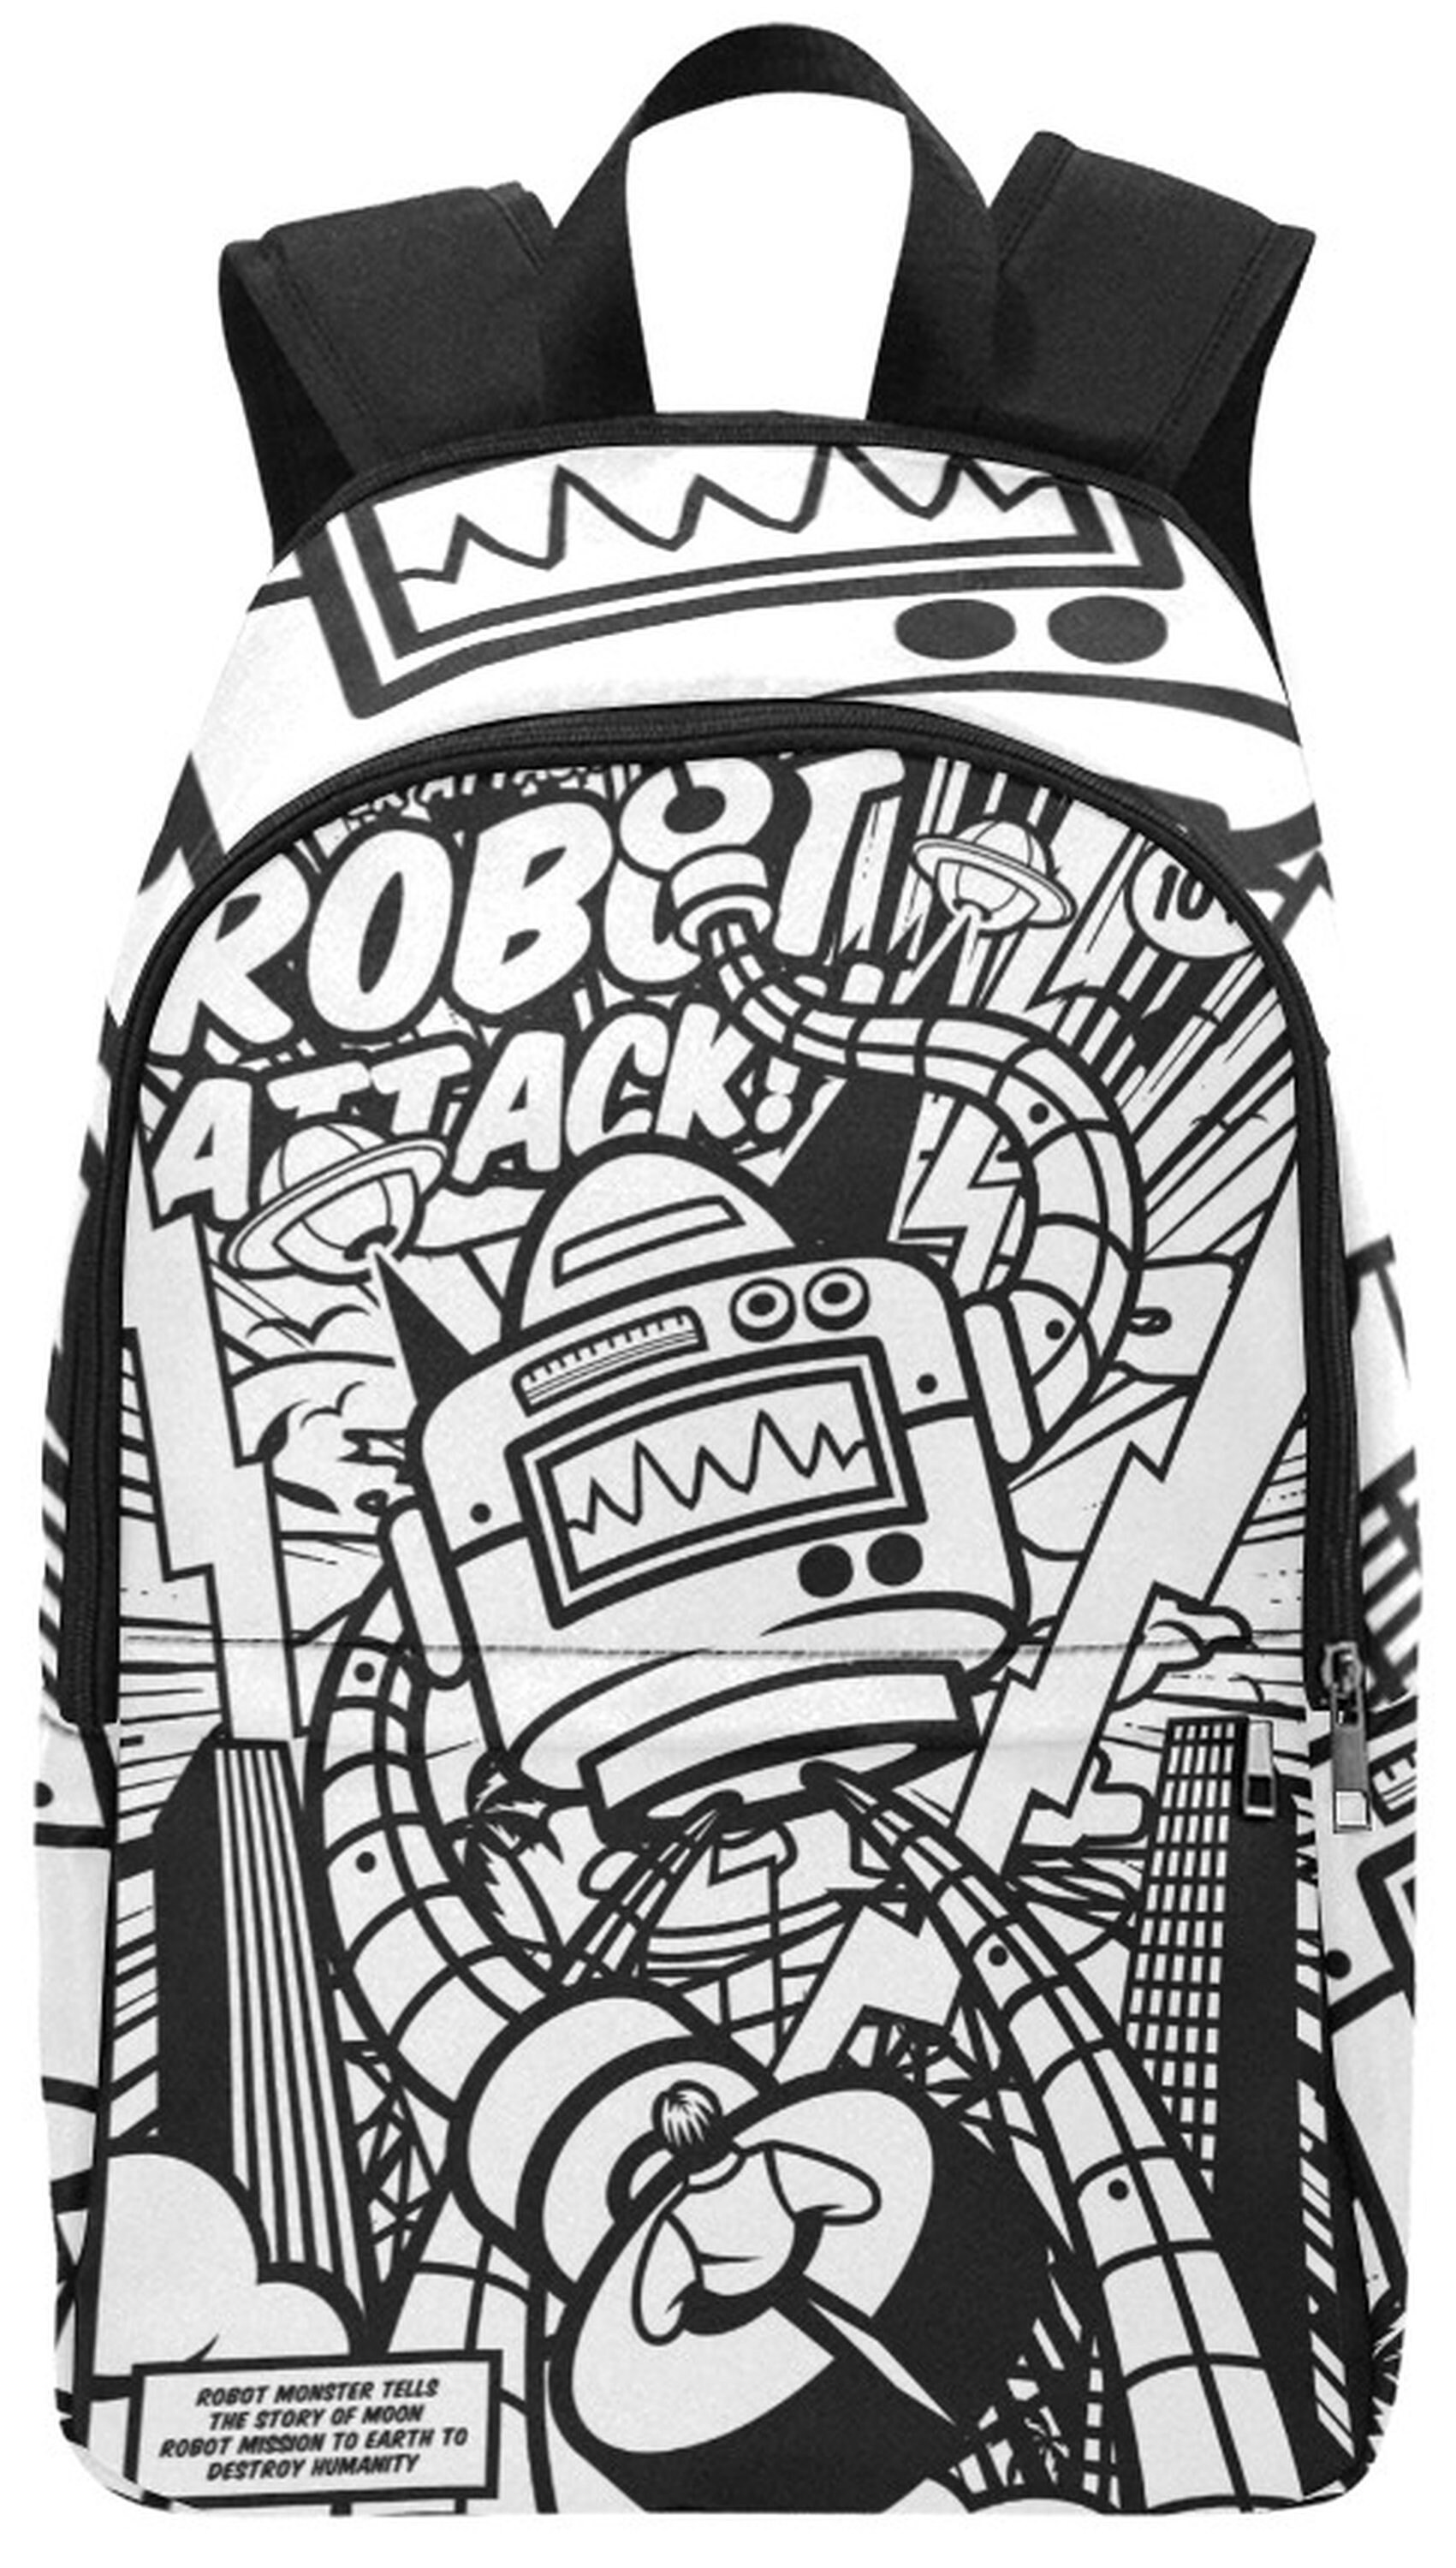 Buy Robot Backpack Bag Bags Handbag Scifi Vintage Robots Personalized  Printed All Over Online in India - Etsy